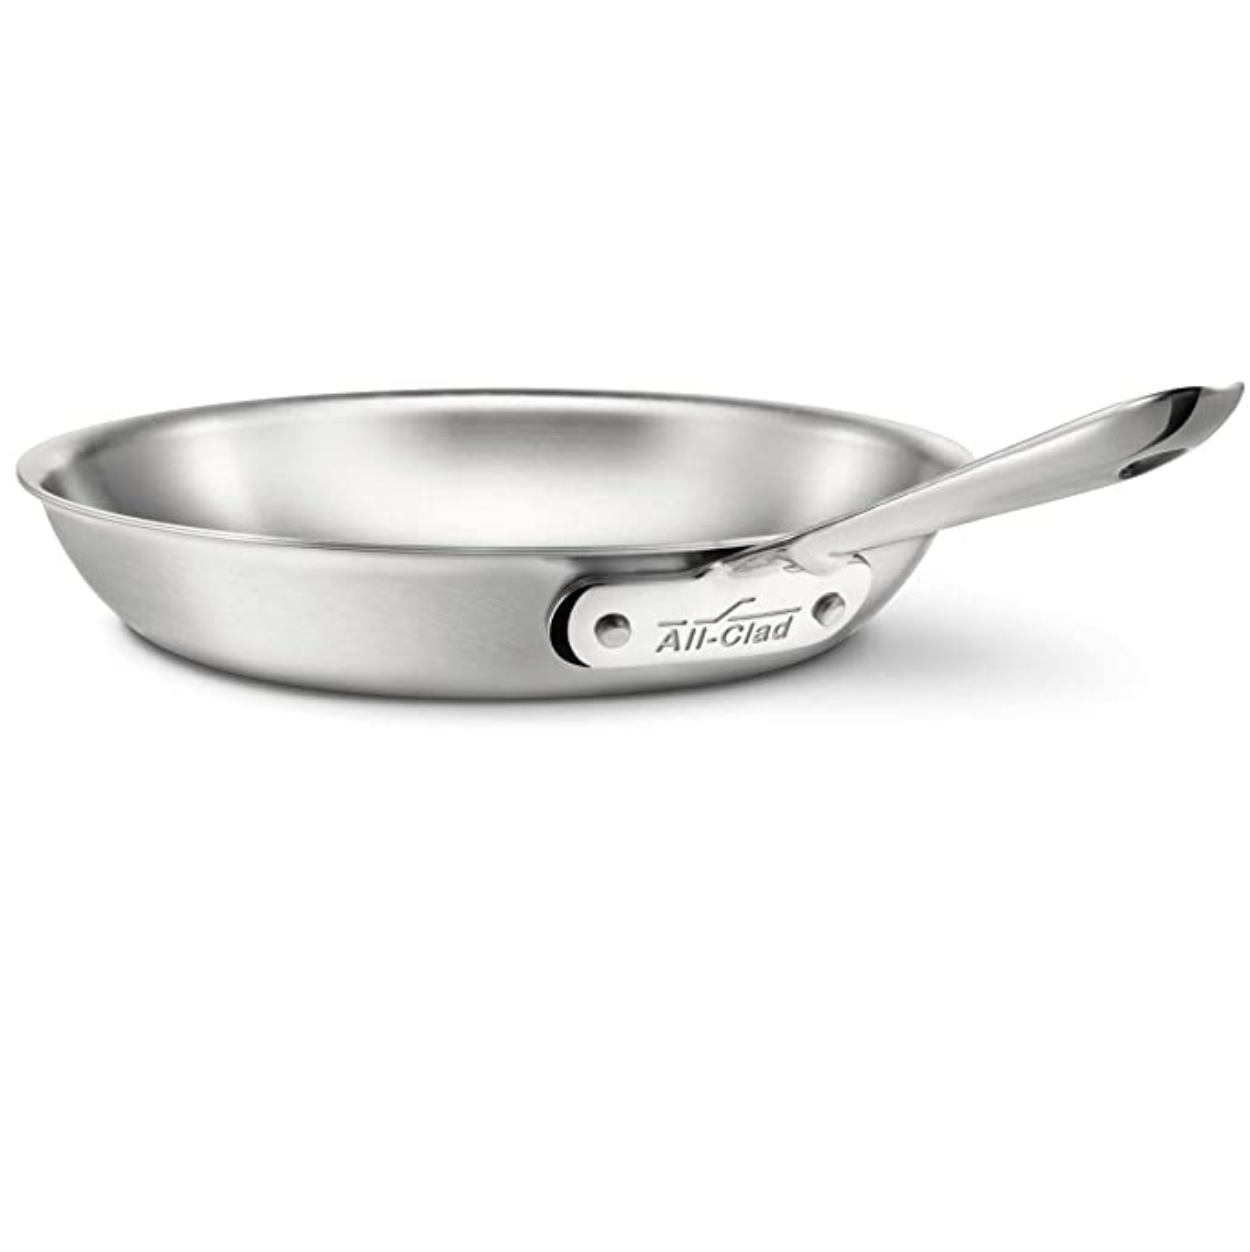  All-Clad 59916 Stainless Steel Dishwasher Safe